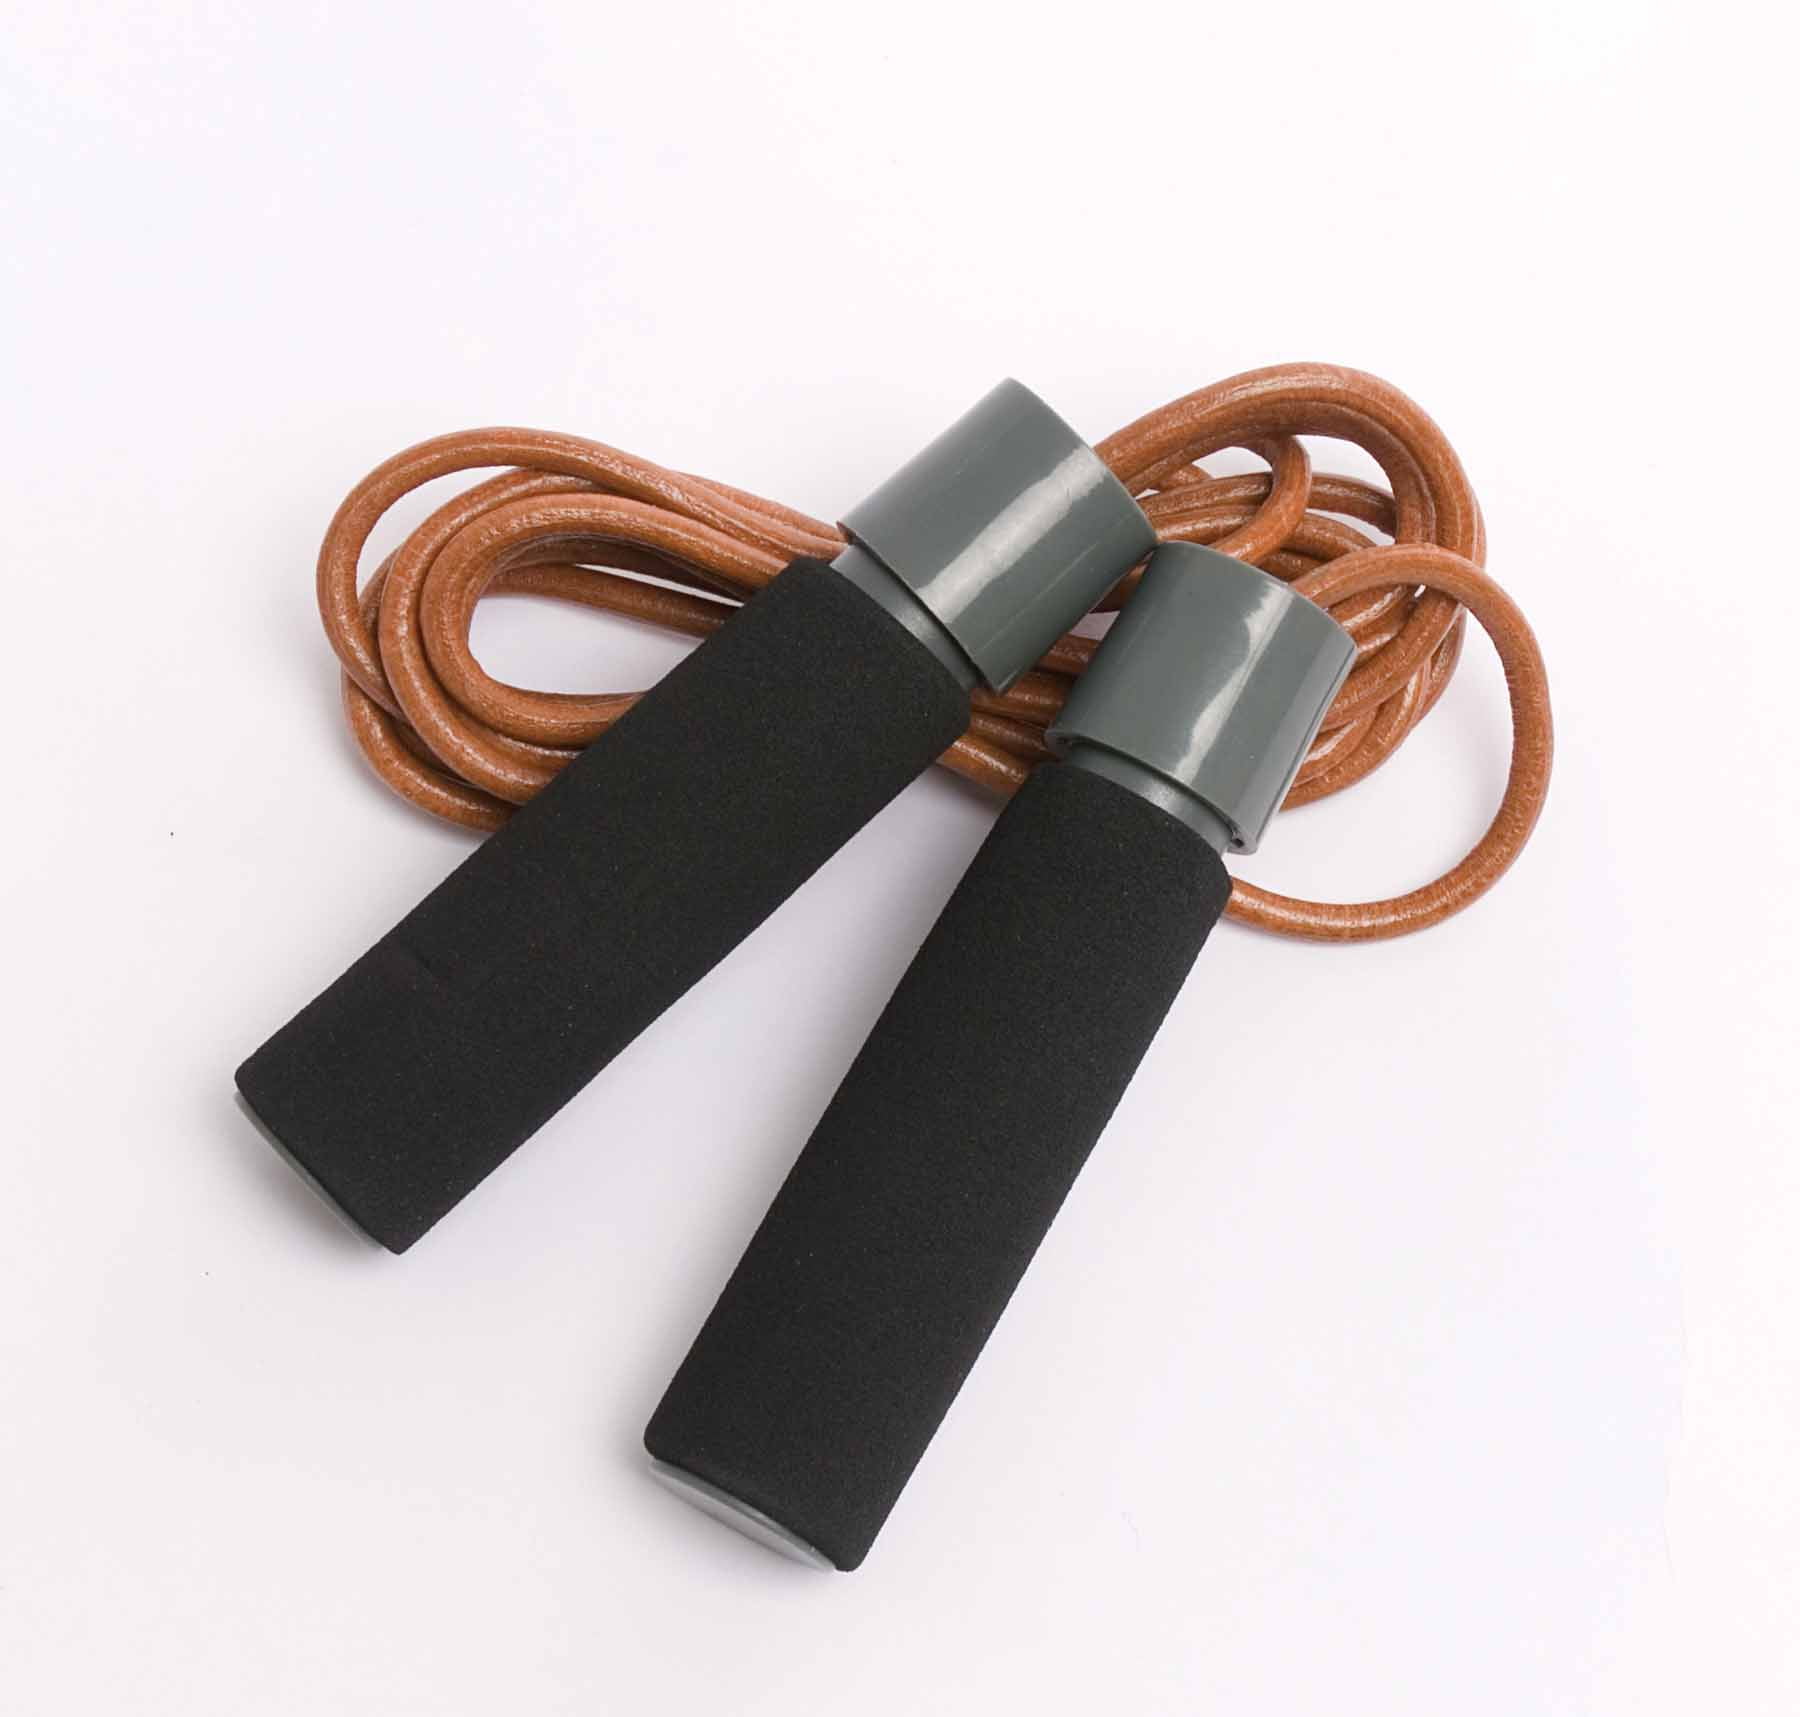 Crossfit & Slim Body Details about   High Speed Skipping Rope with Non-Slip Handle for Fitness 